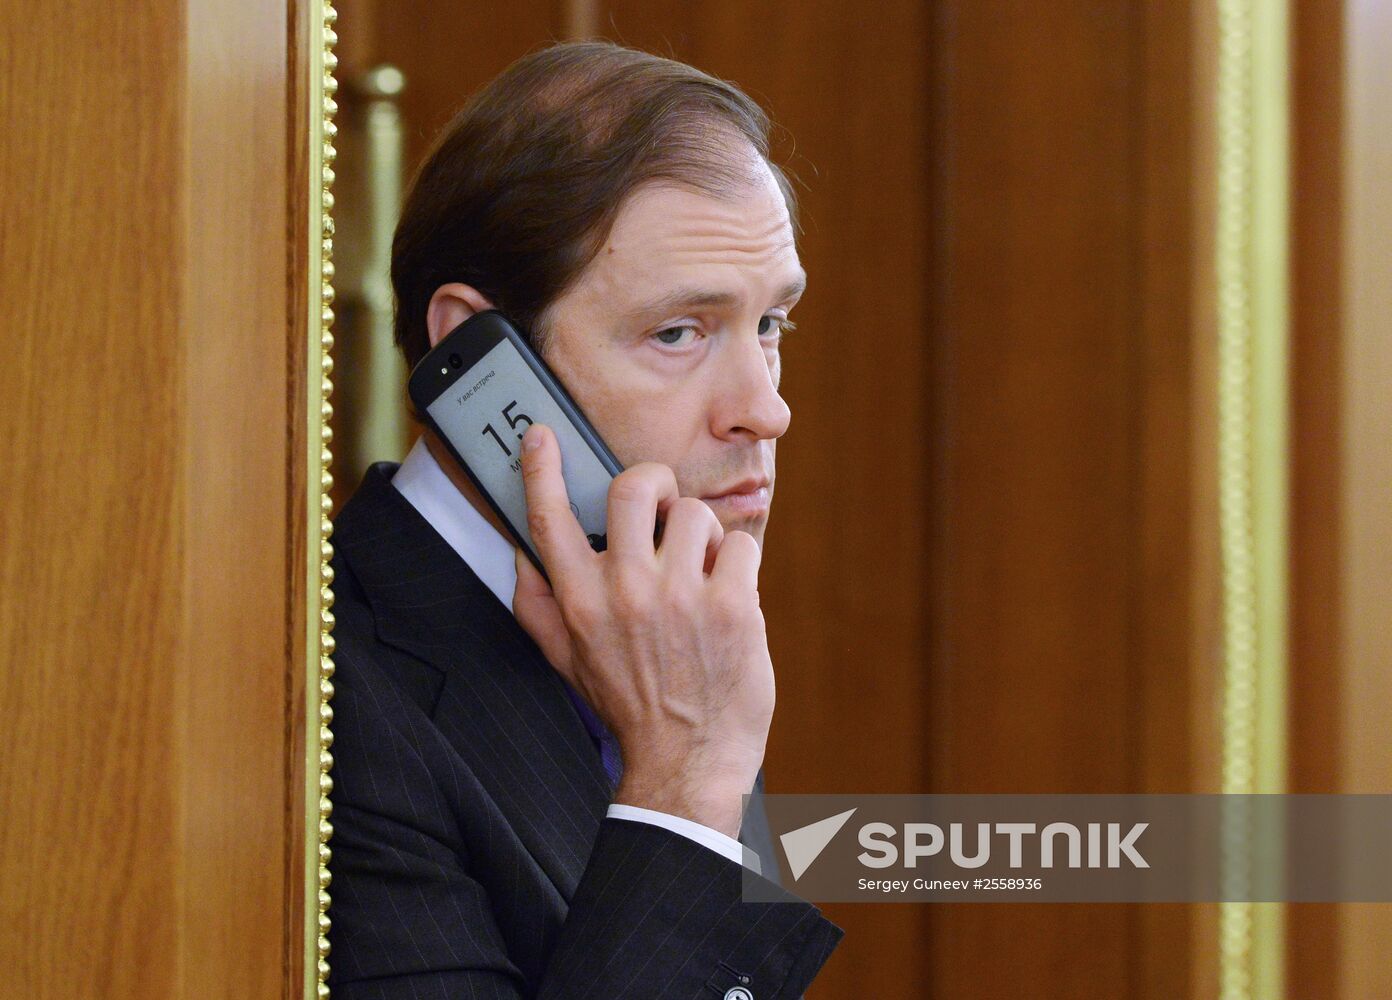 Russian Prime Minister Dmitry Medvedev chairs meeting of Russian government